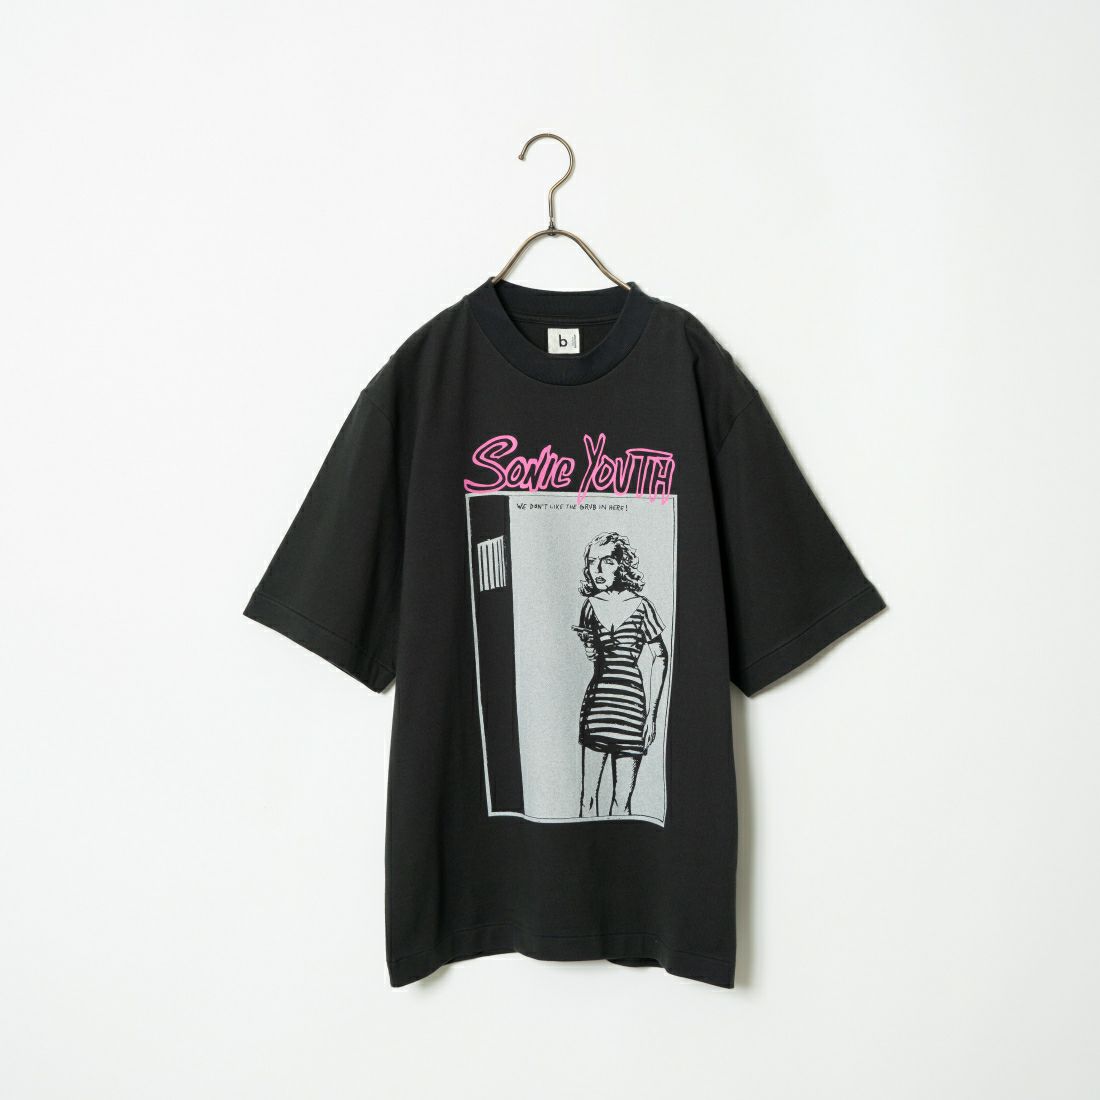 blurhms ROOTSTOCK [ブラームス ルーツストック] We dont like スタンダードプリントTシャツ [BROOTS24S33SONIC6] 02 INK BLK